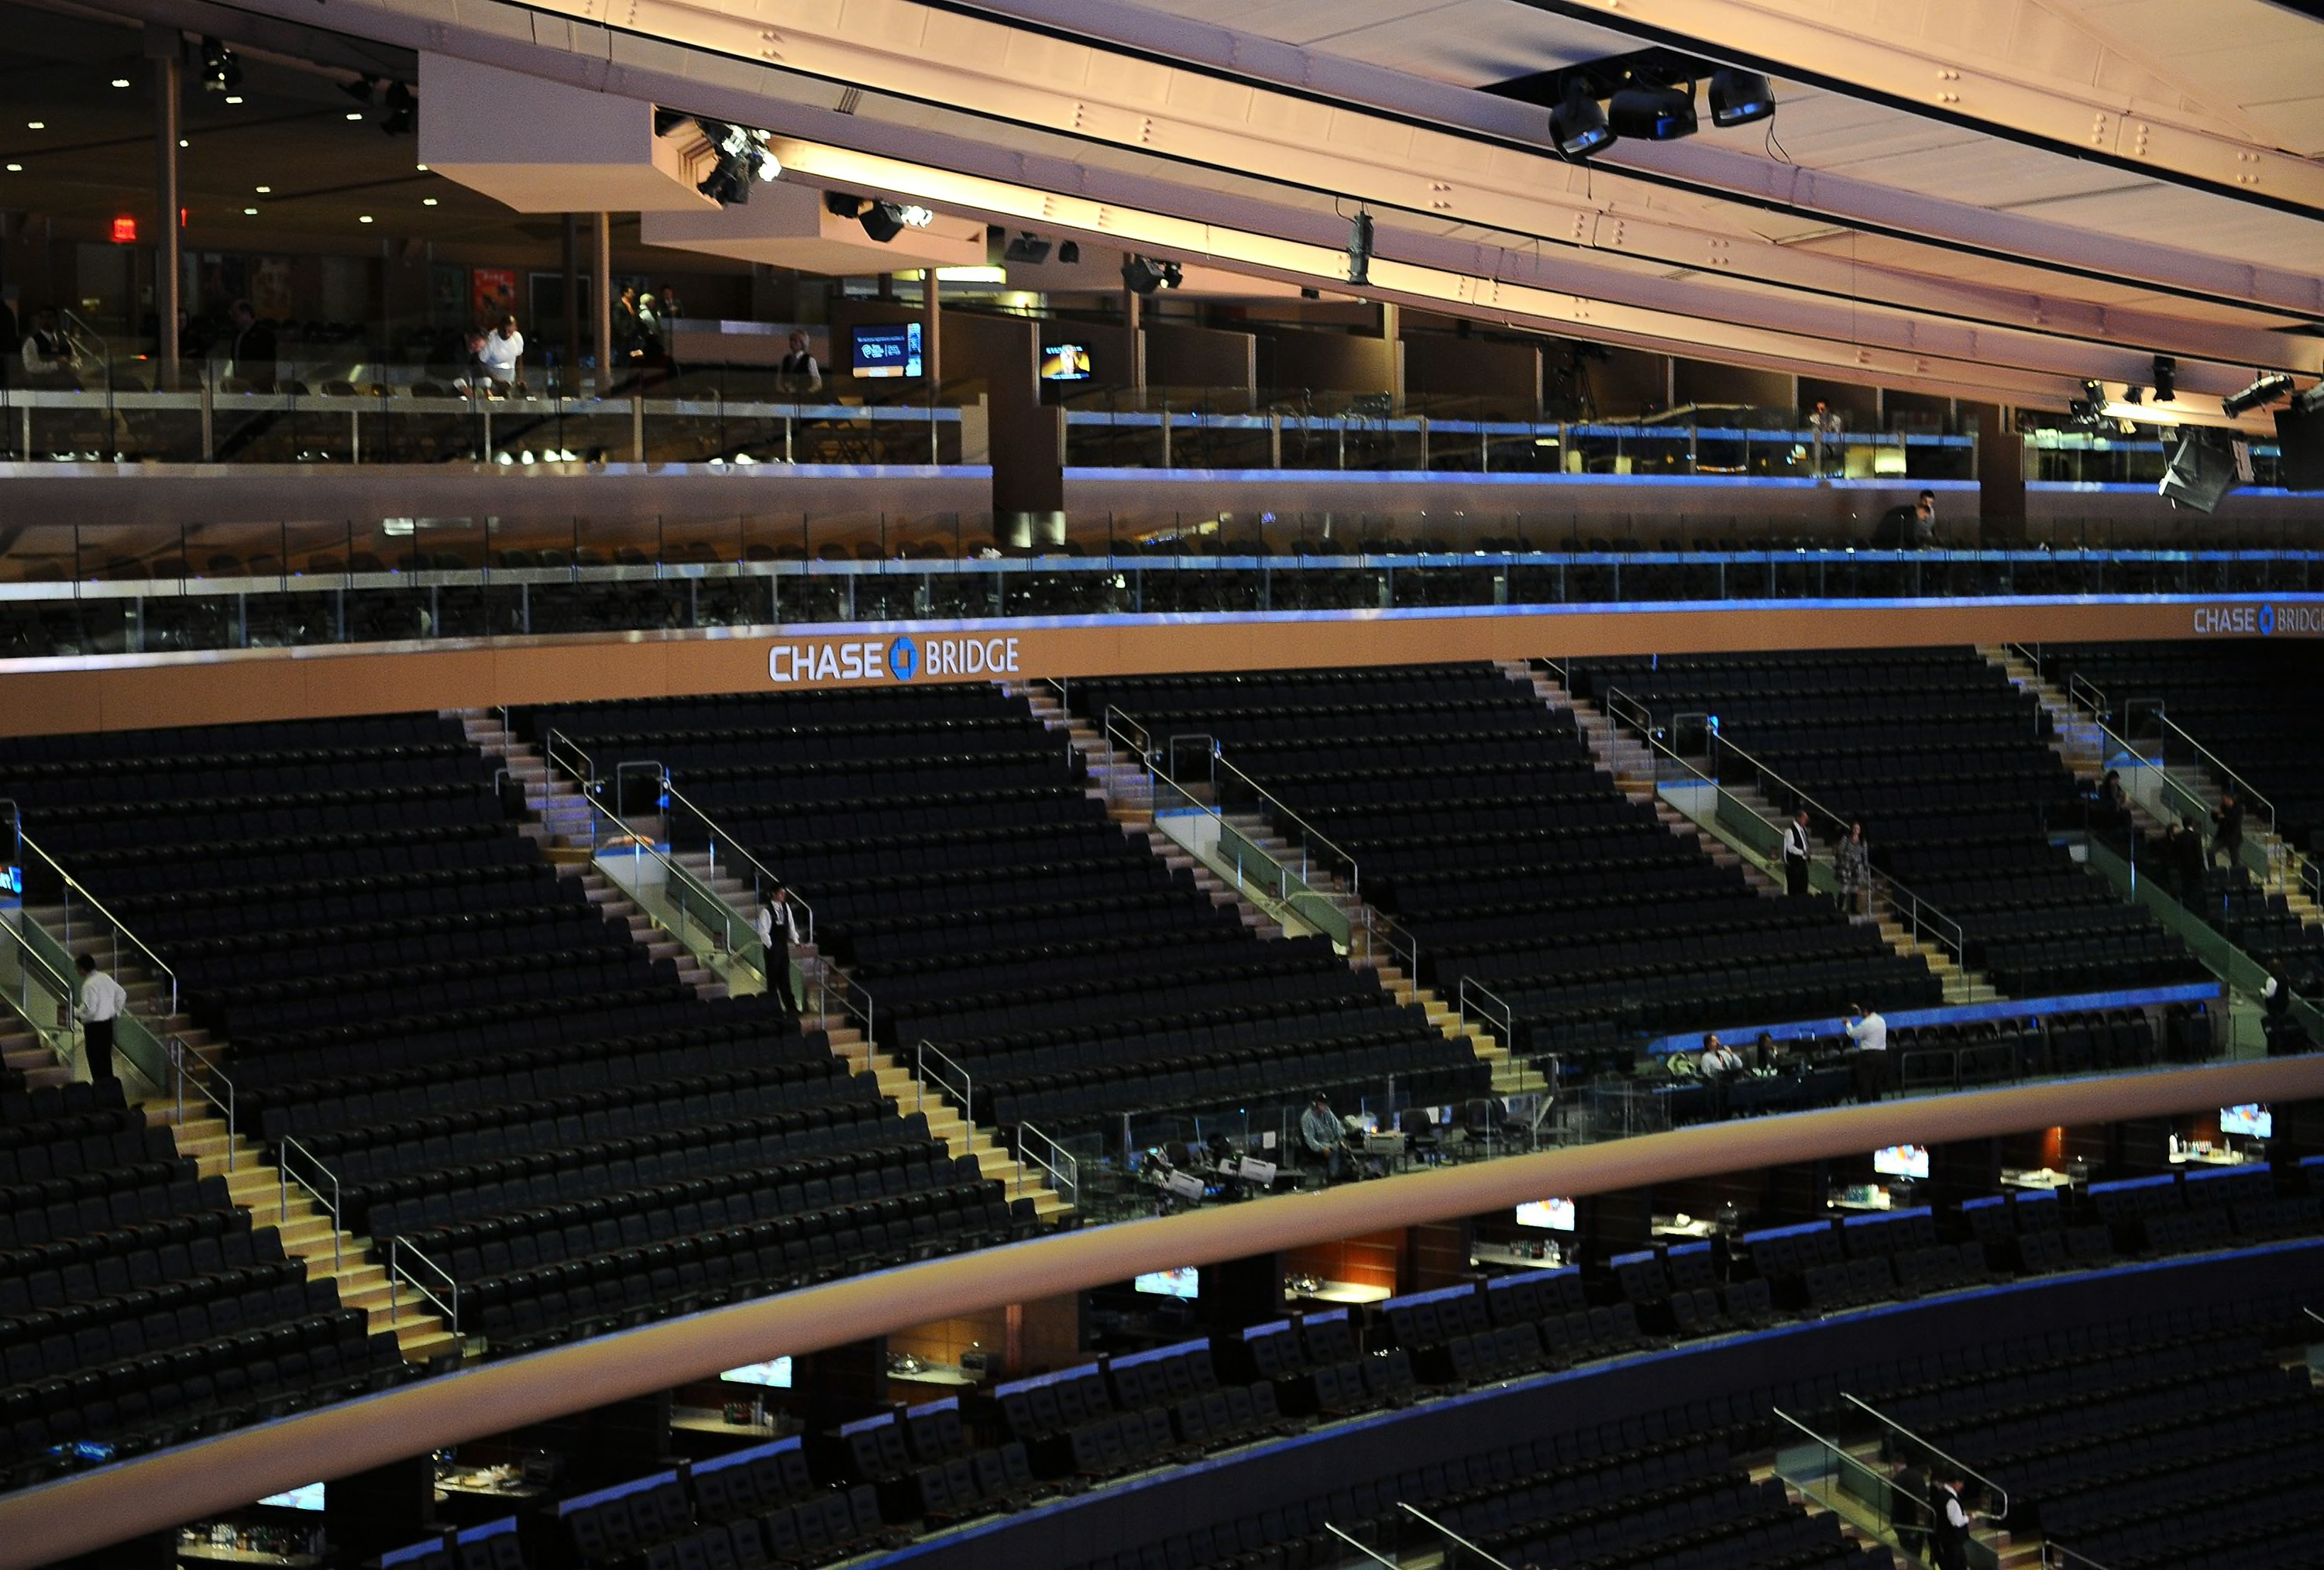 New York Rangers: Improving the Madison Square Garden Experience